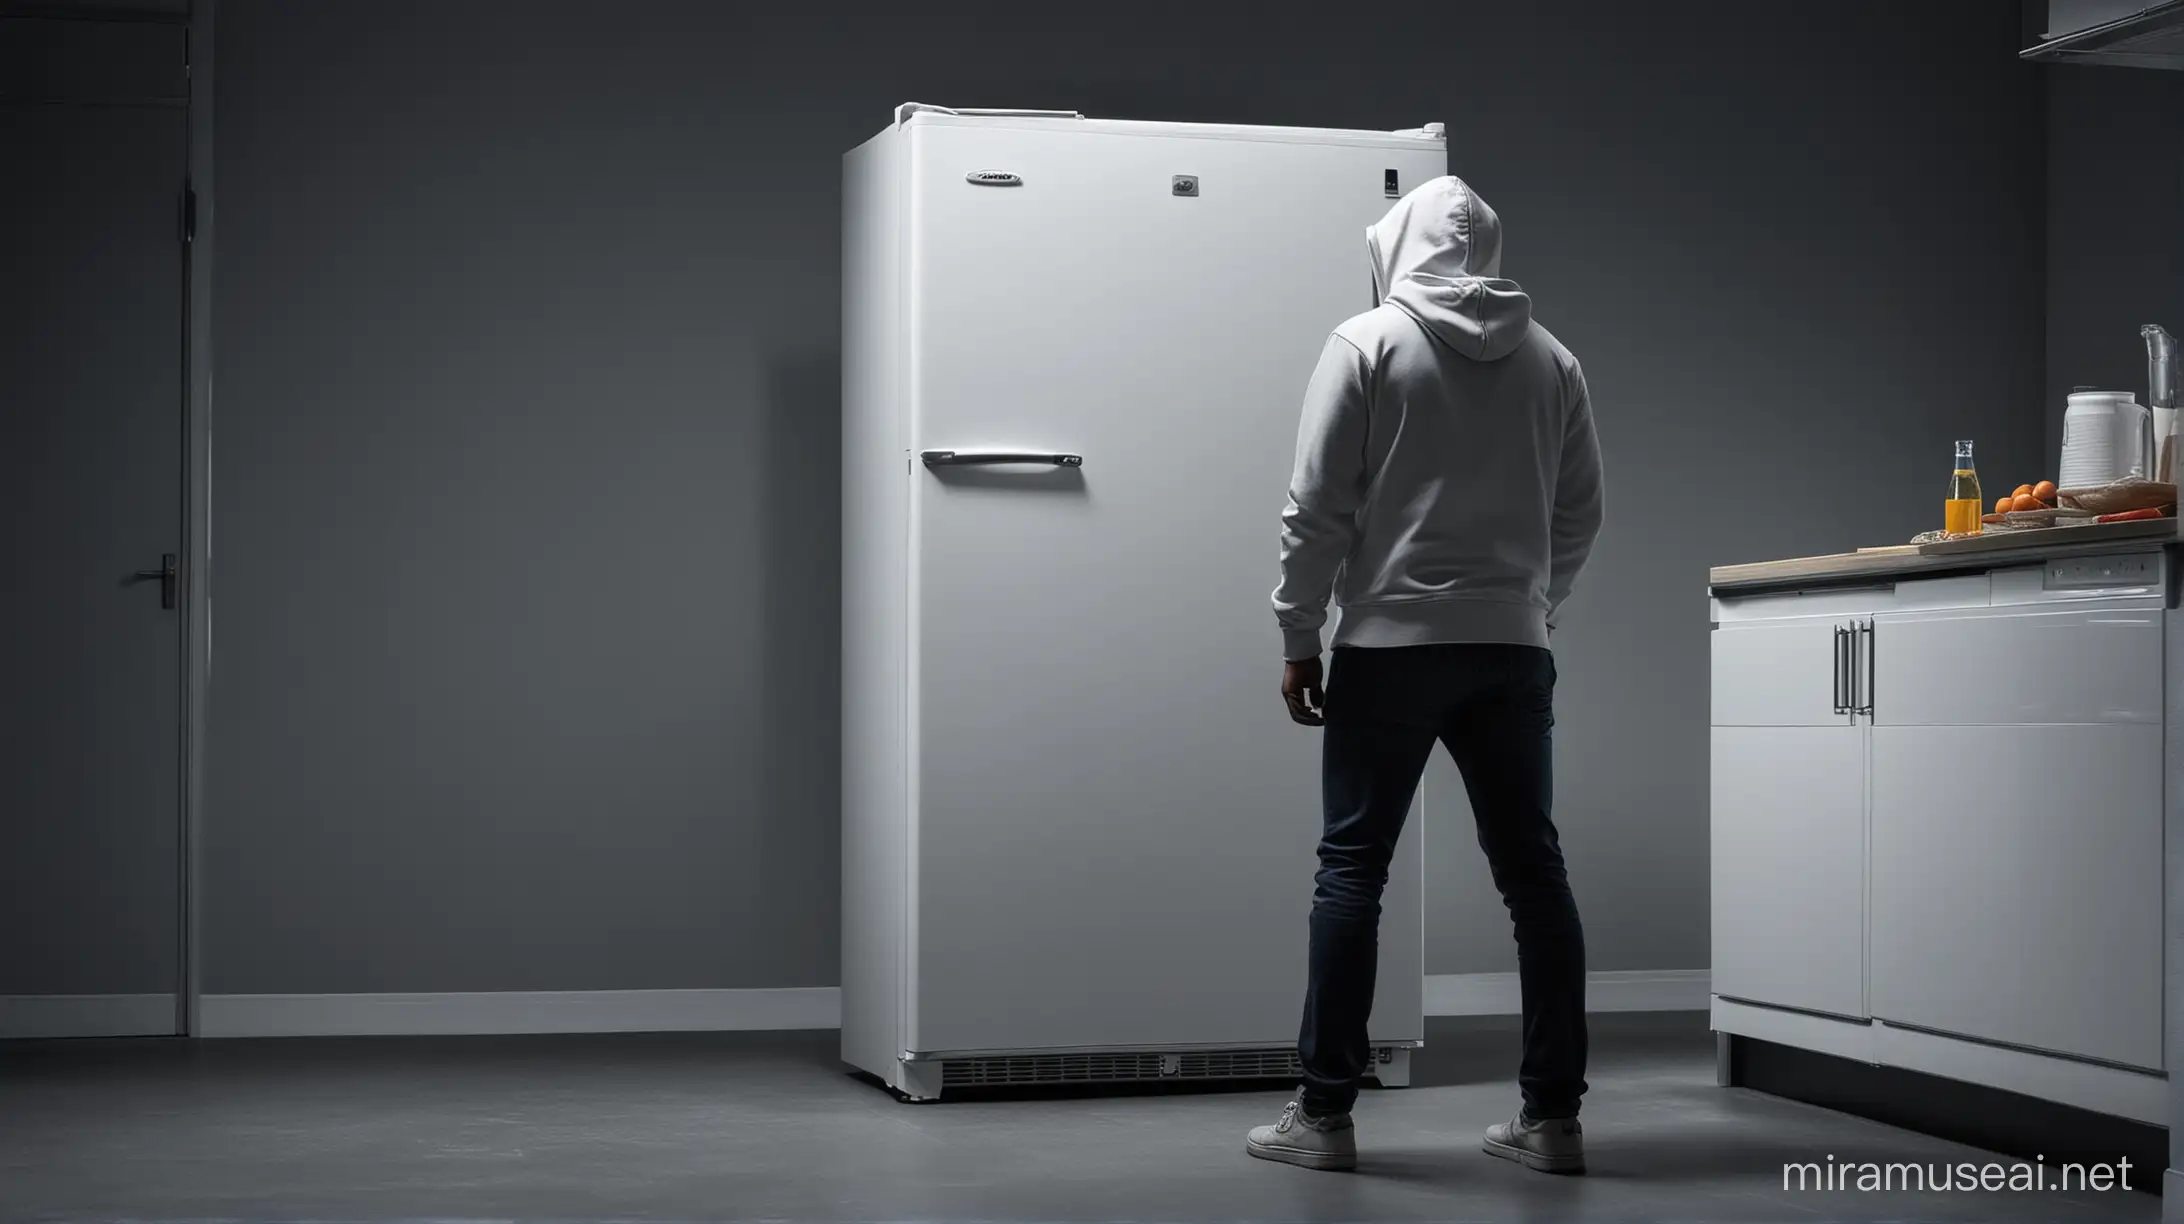 Create a realistic AI image of a dark room with a L Double Door White Hard Top Deep Freezer as the focal point. Show a indian man standing in front of the fridge, wearing a hoodie, and captured from behind. The scene should convey a sense of mystery or suspense, with the man's presence adding an element of intrigue. Use lighting and shadows to enhance the mood of the image, emphasizing the contrast between the white fridge and the dark surroundings